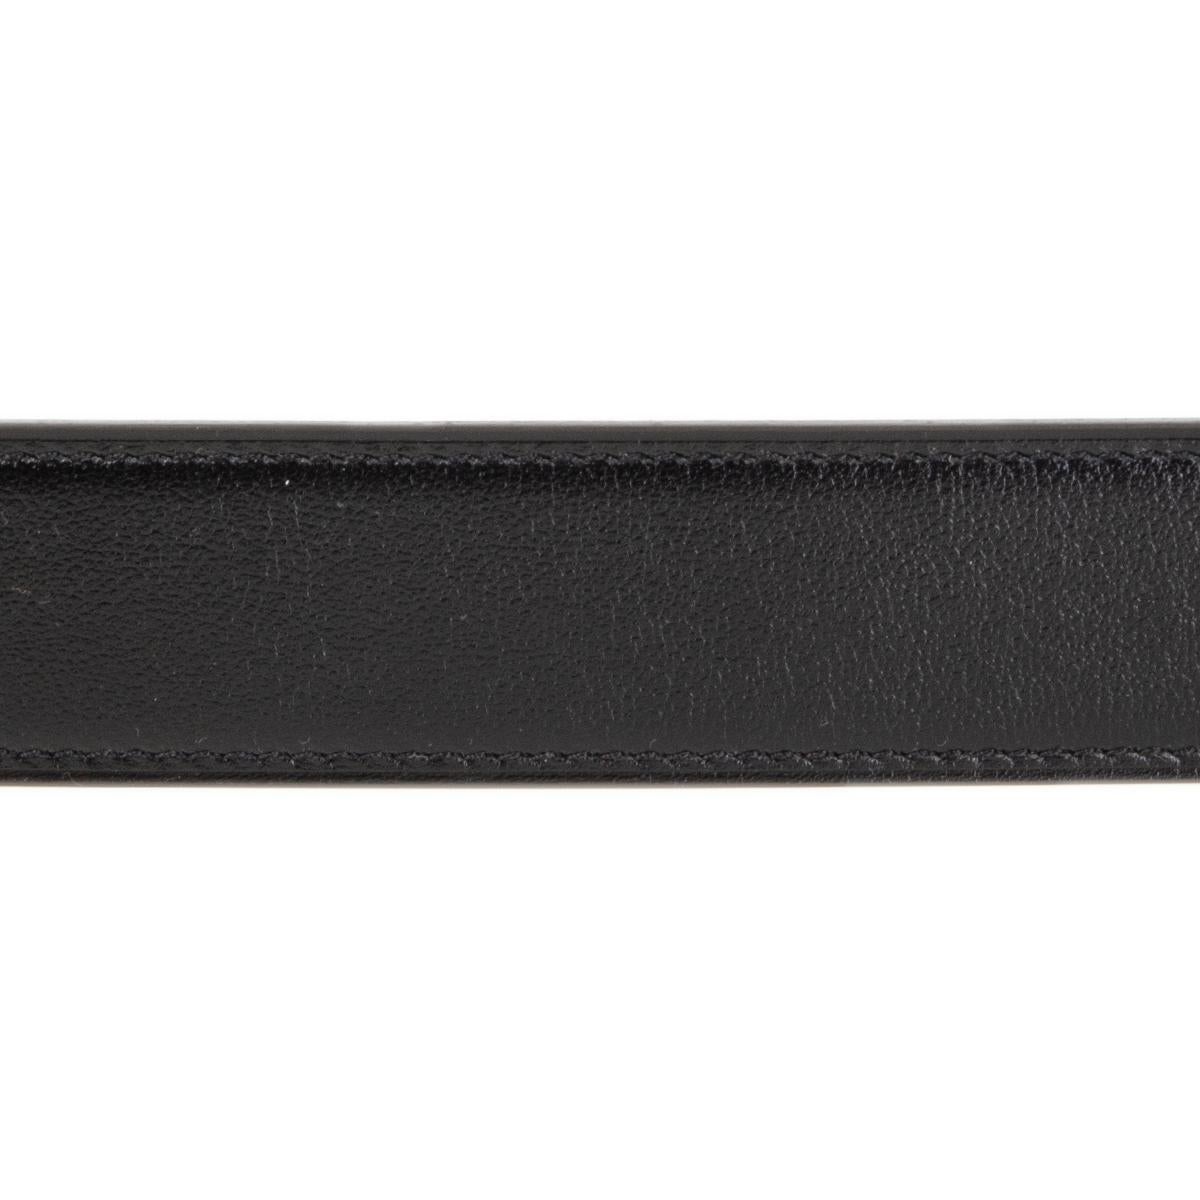 100% auth Hermes 32mm reversible belt strap in Noir (black) Veau Box and Etain (grey) Veau Togo leather. Brand new. Comes with box.

Tag Size	105
Width	3.2cm (1.2in)
Fits	102cm (39.8in) to 107cm (41.7in)

All our listings include only the listed